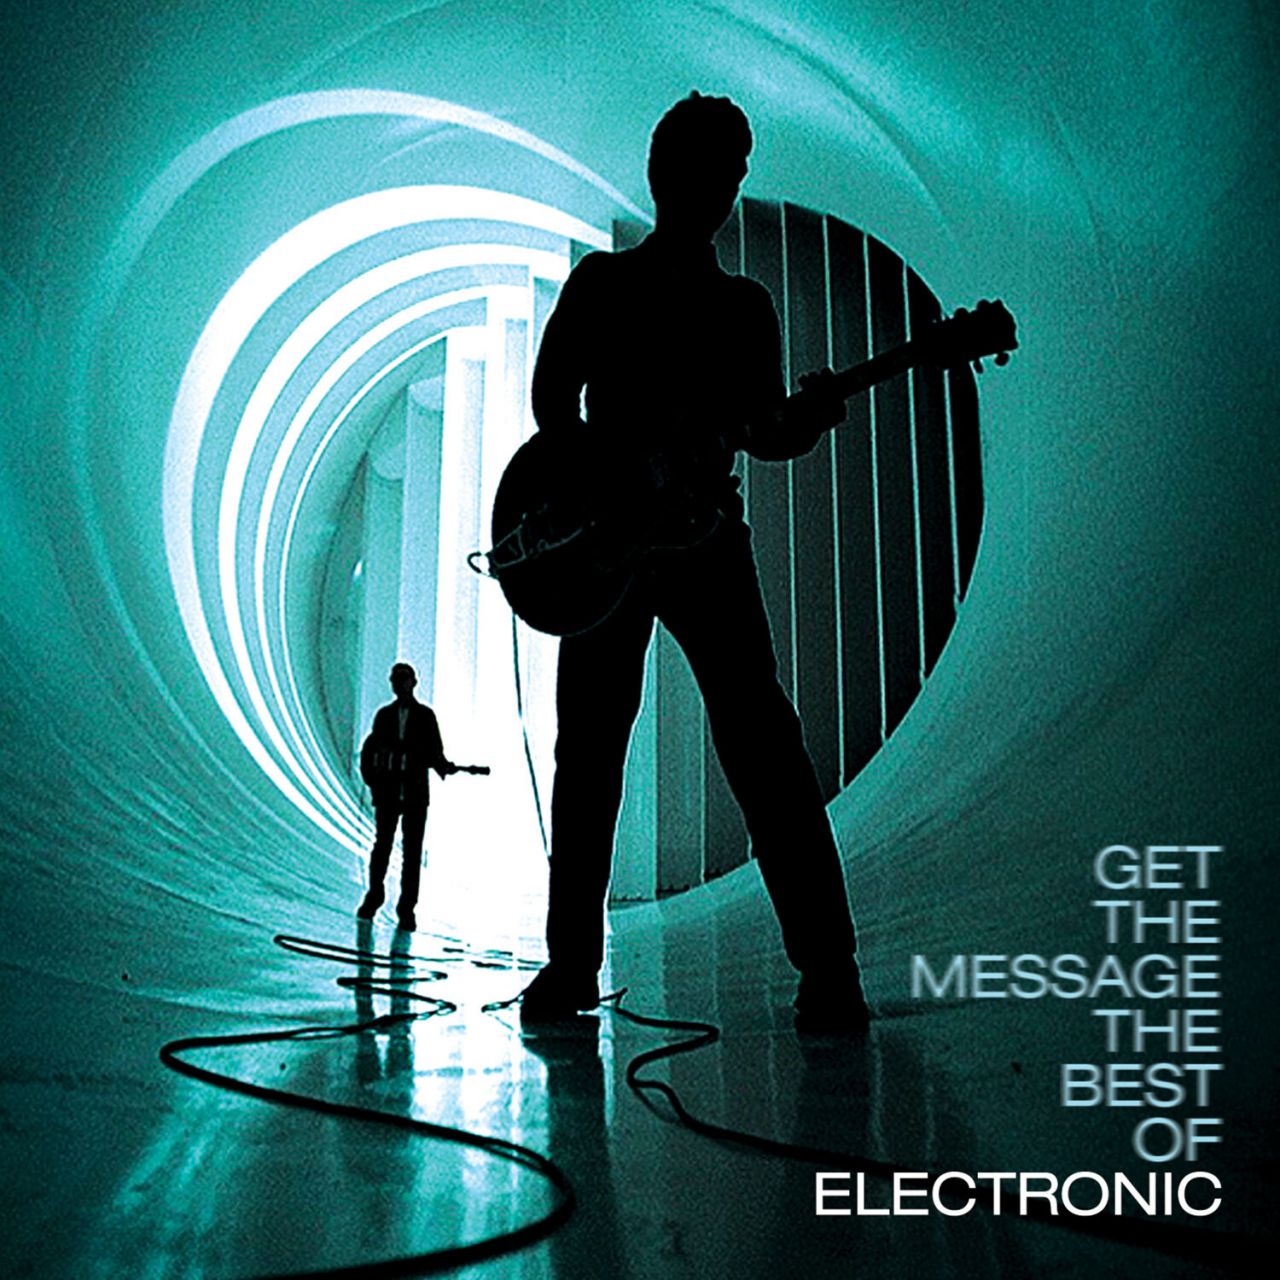 Electronic - Get The Message: The Best Of Electronic - 2CD